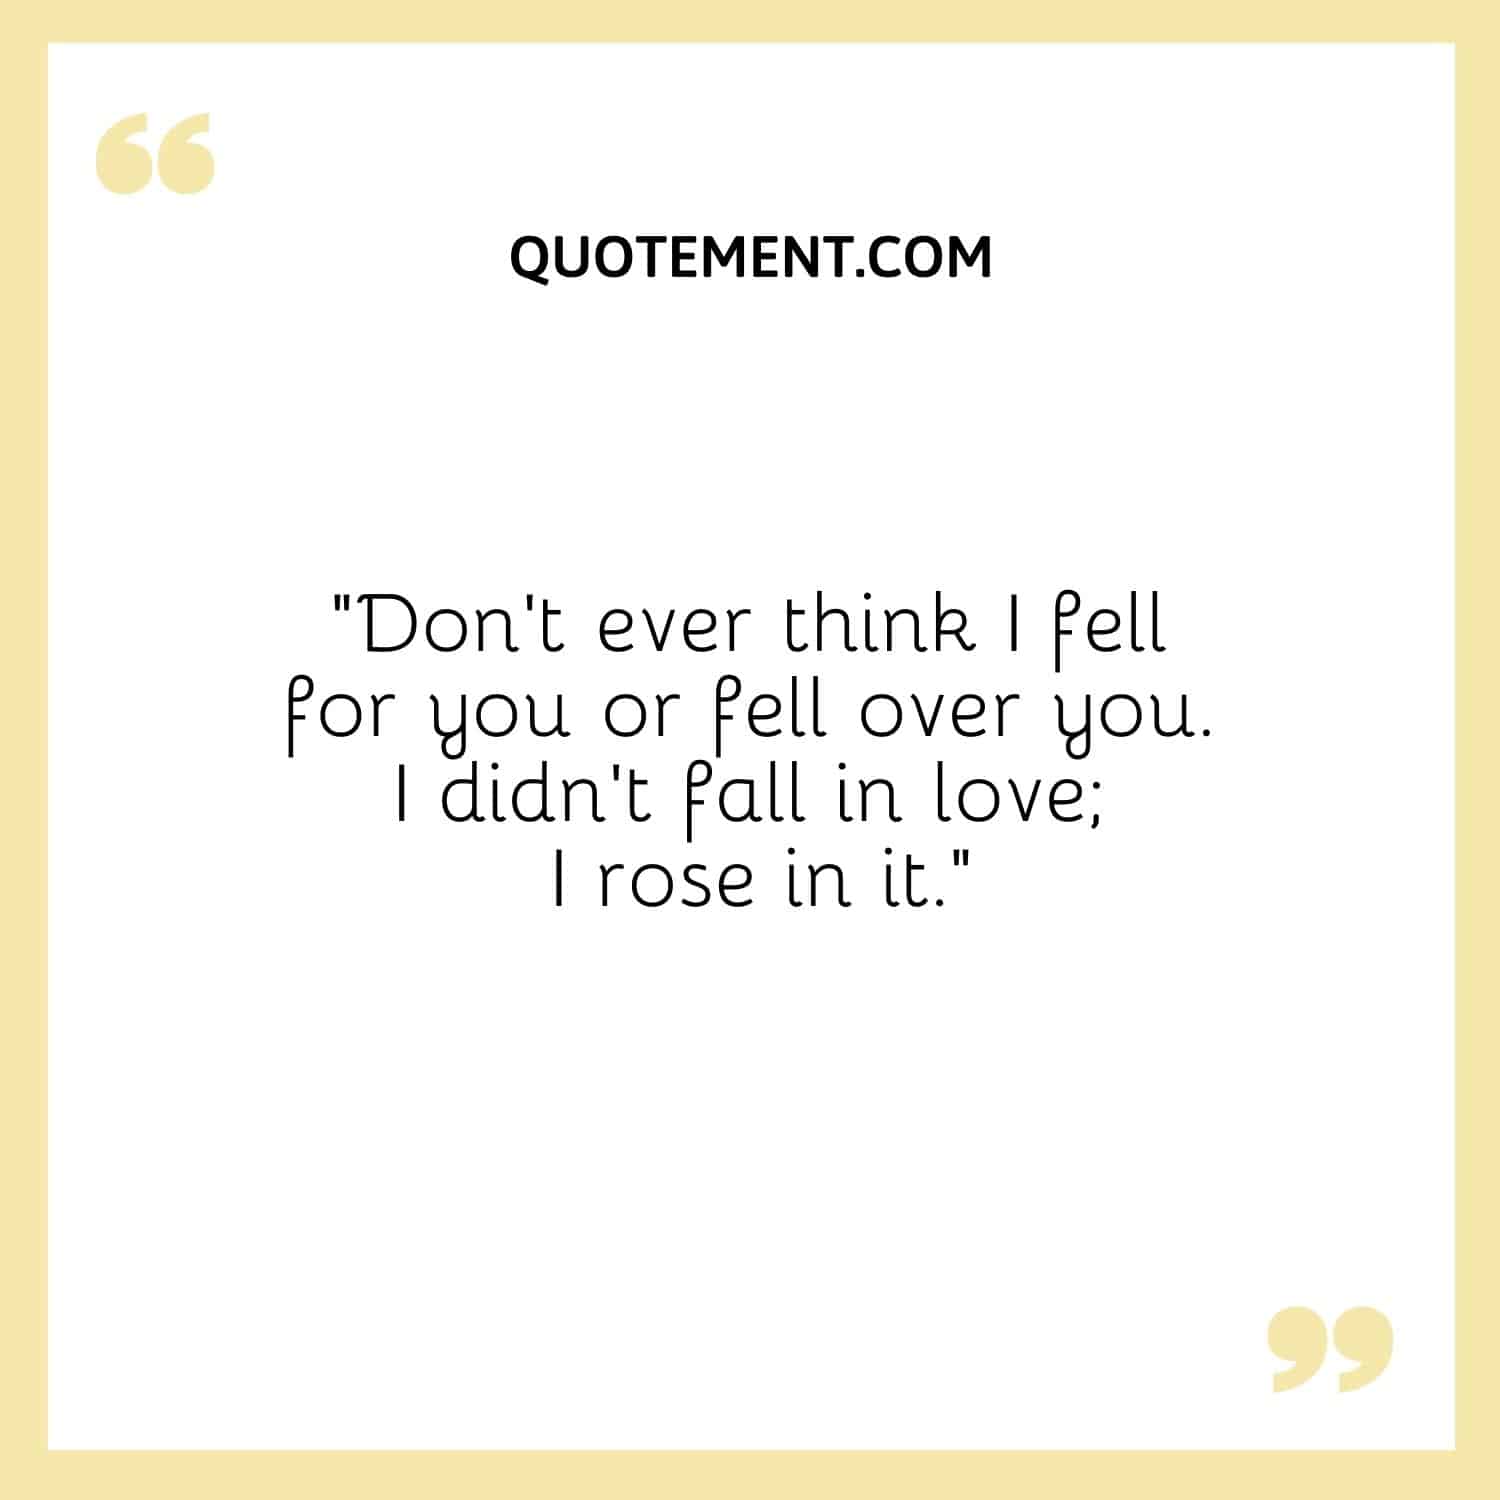 Don’t ever think I fell for you or fell over you